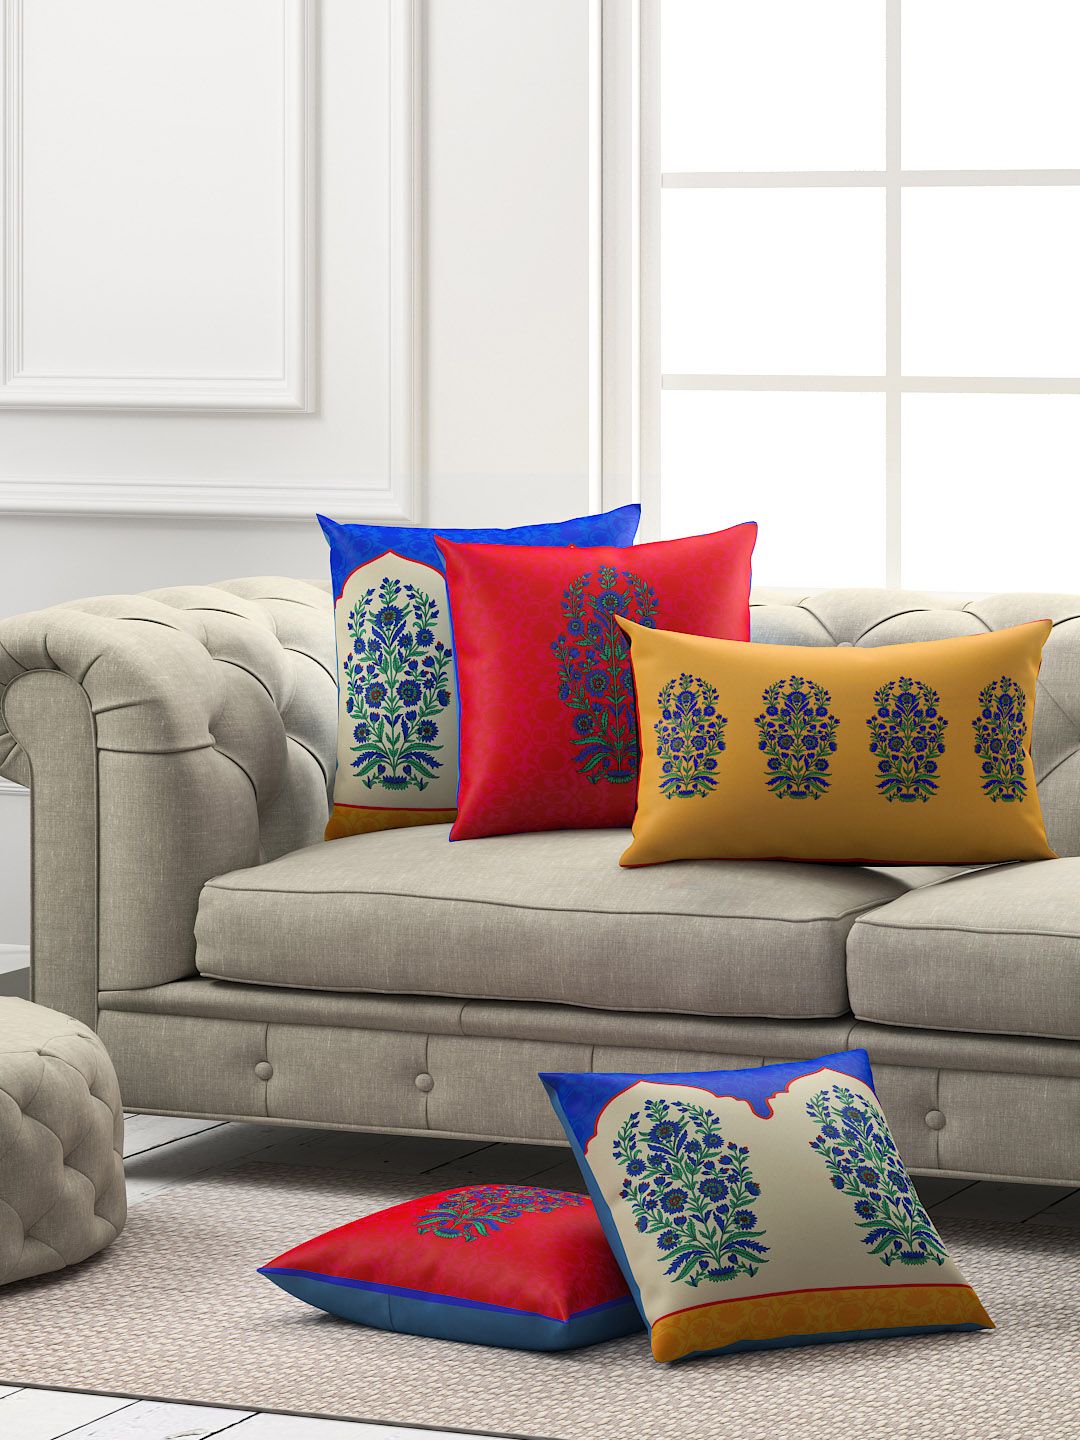 SEJ by Nisha Gupta Set of 5 Ethnic Square Cushion Covers Price in India